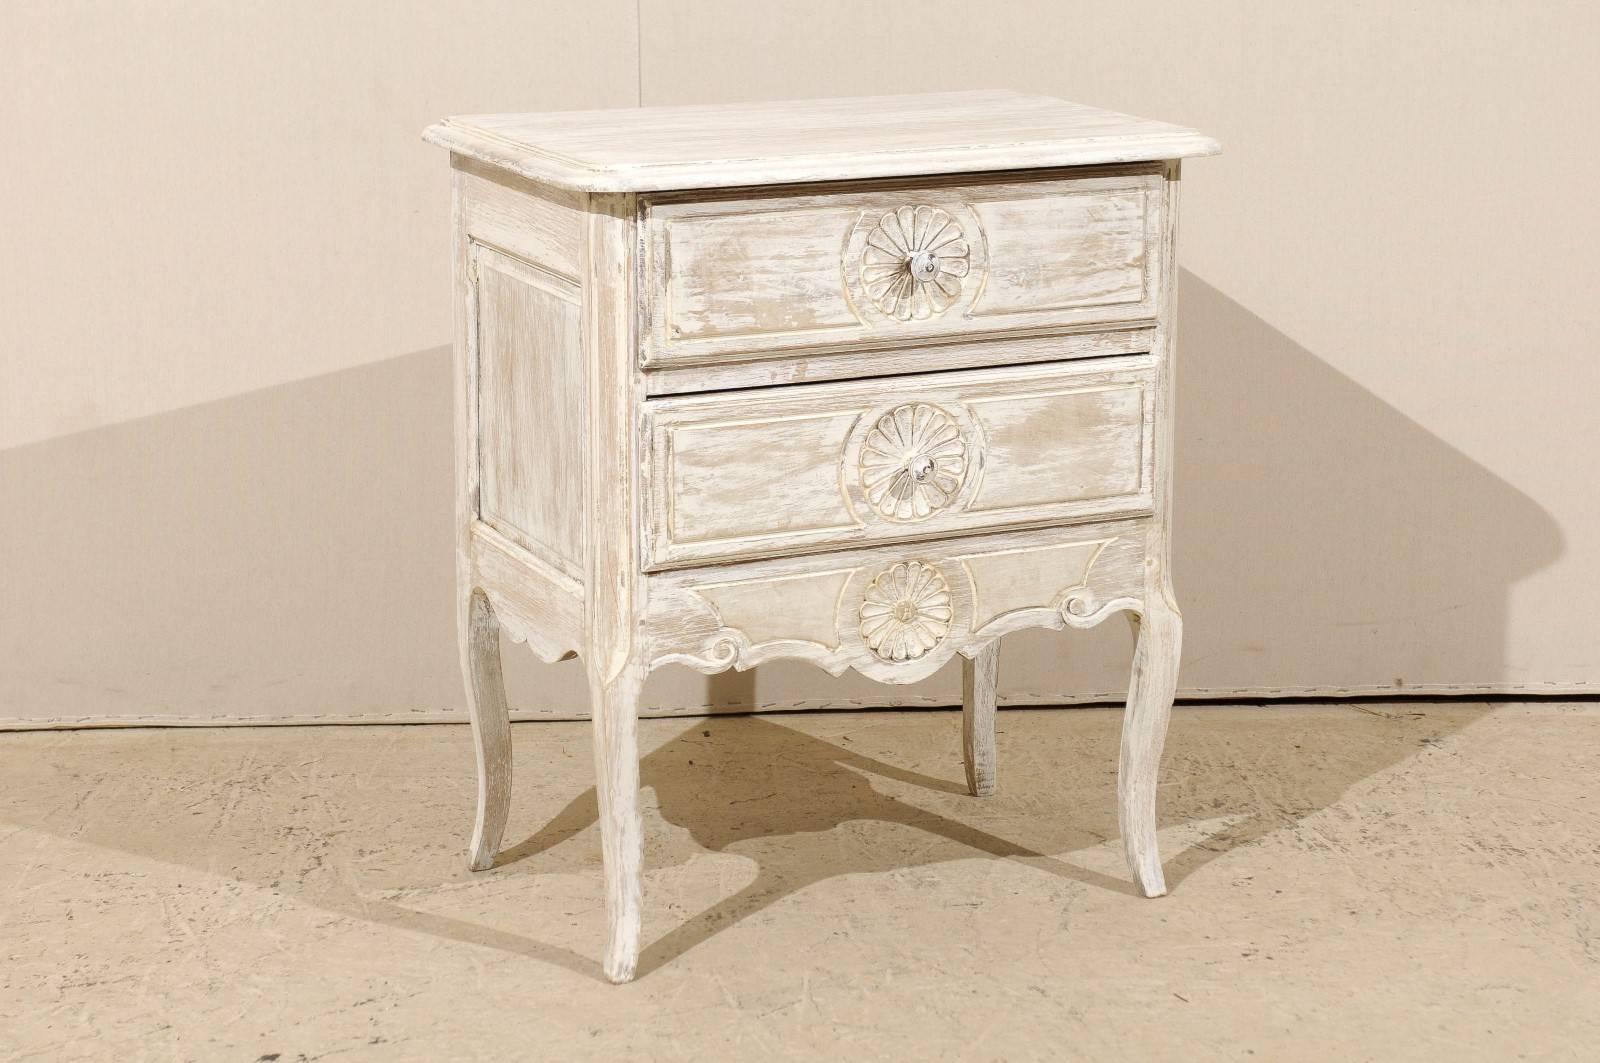 A small French 19th century two-drawer chest with a light white washed finish with some wood coming through. This French chest is decorated with three floral motifs on the drawers and the nicely carved skirt. It sits on four cabriole legs, circa